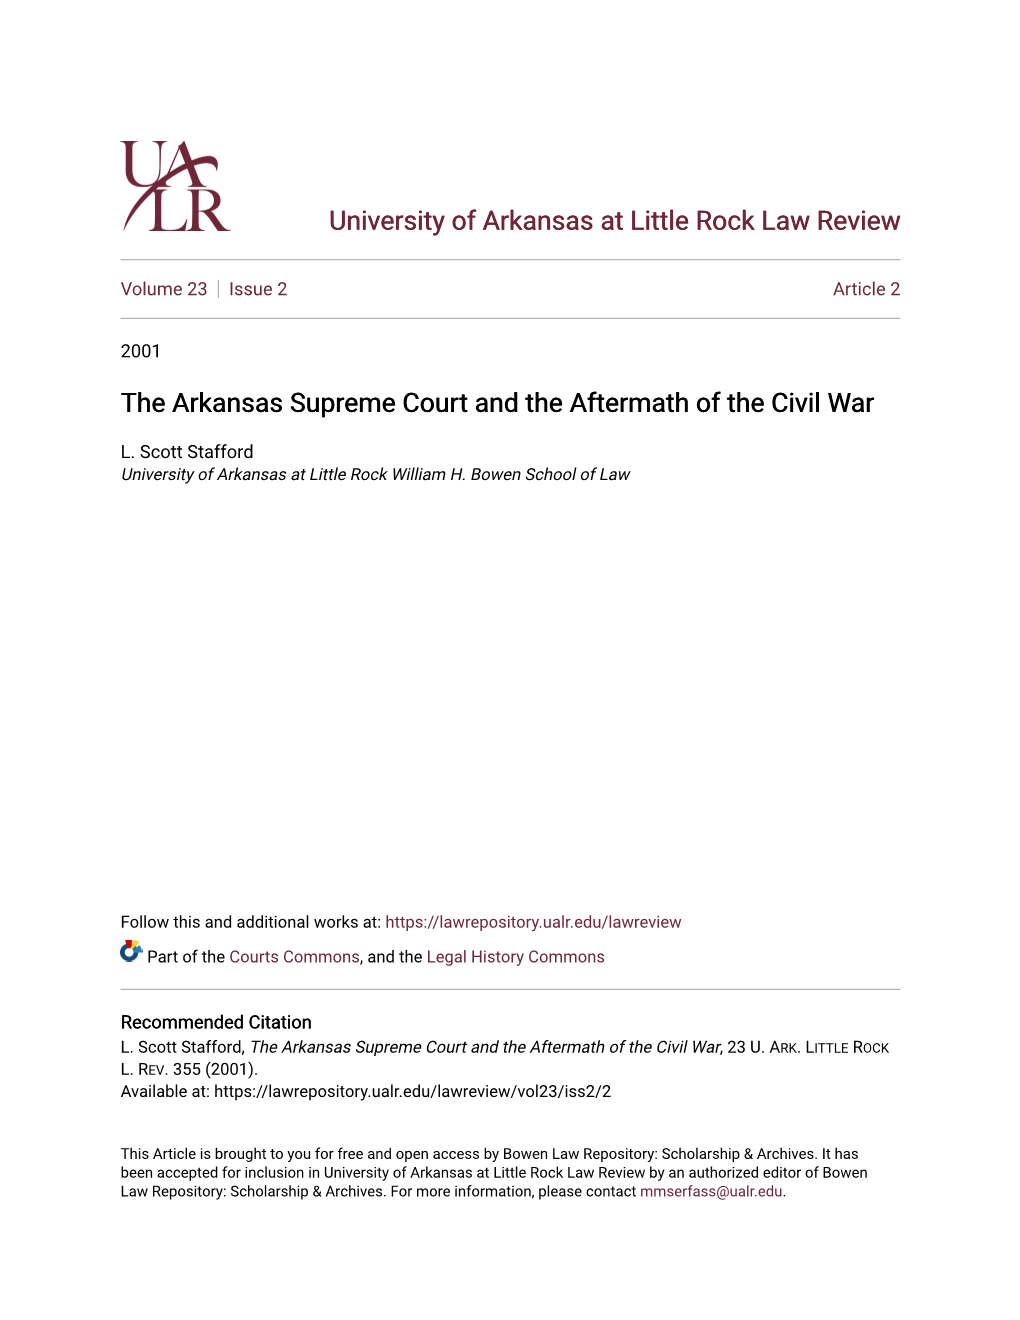 The Arkansas Supreme Court and the Aftermath of the Civil War